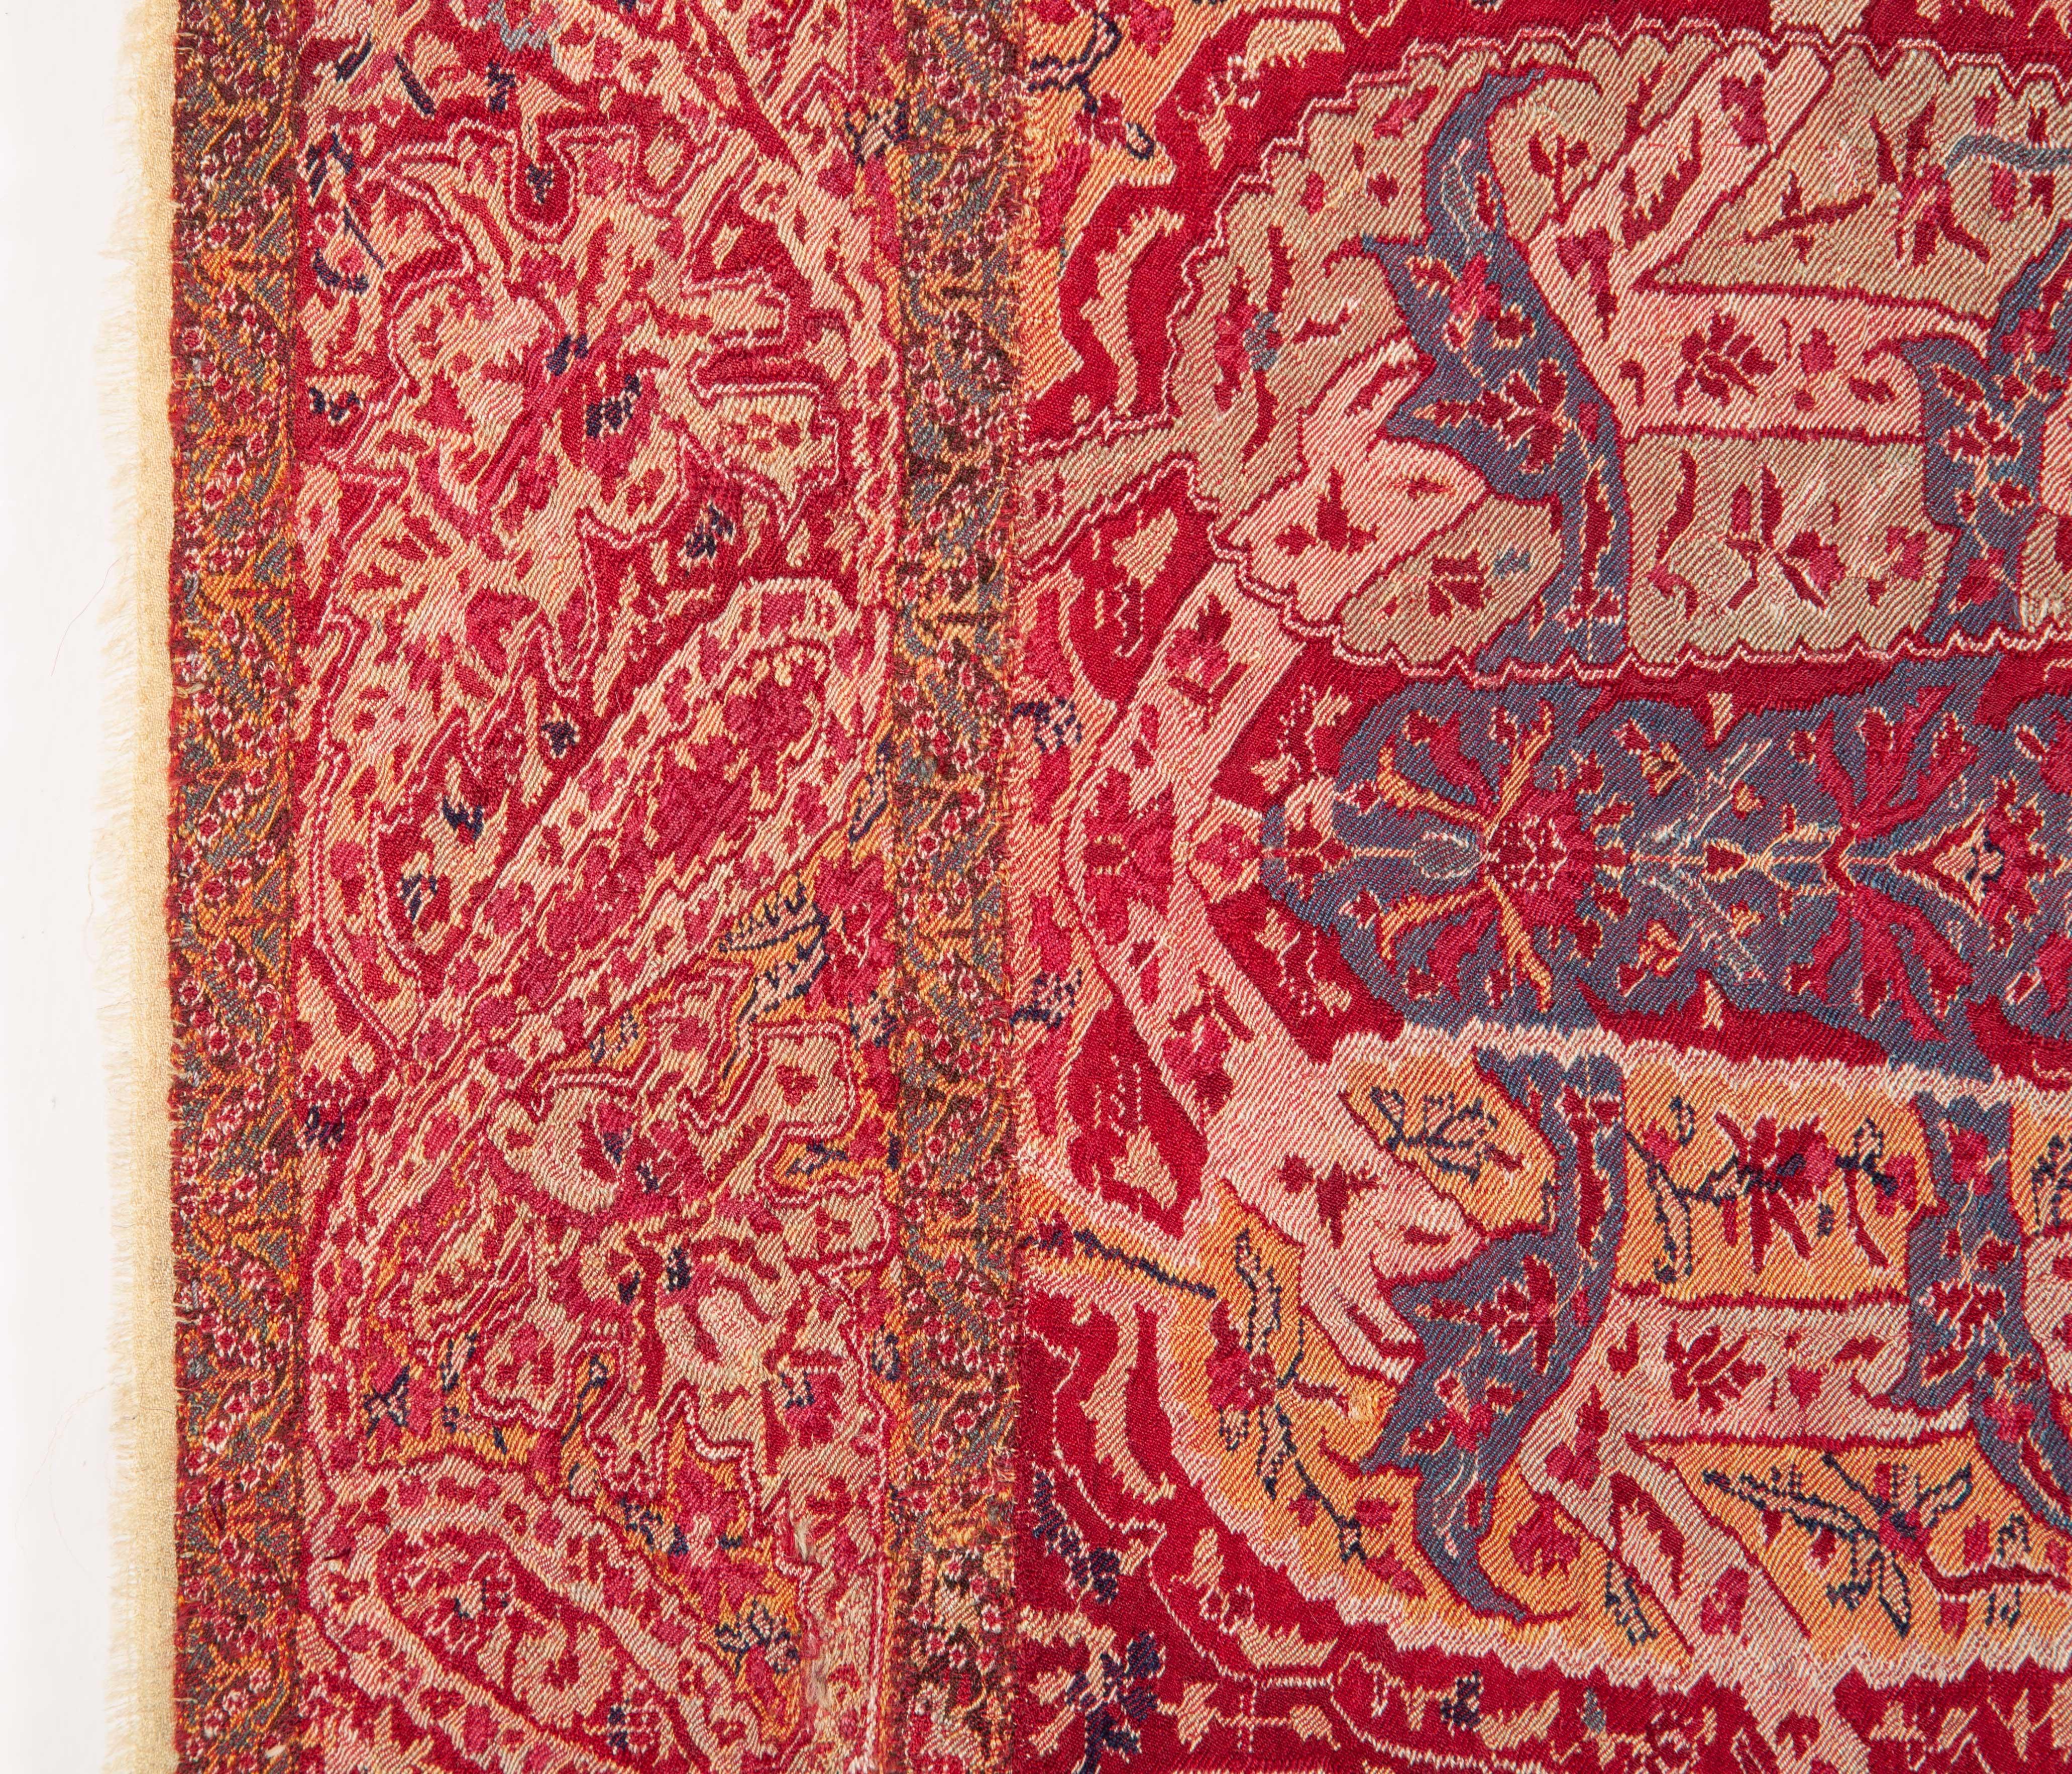 Indian Antique Kashmir Shawl from India, 19th Century